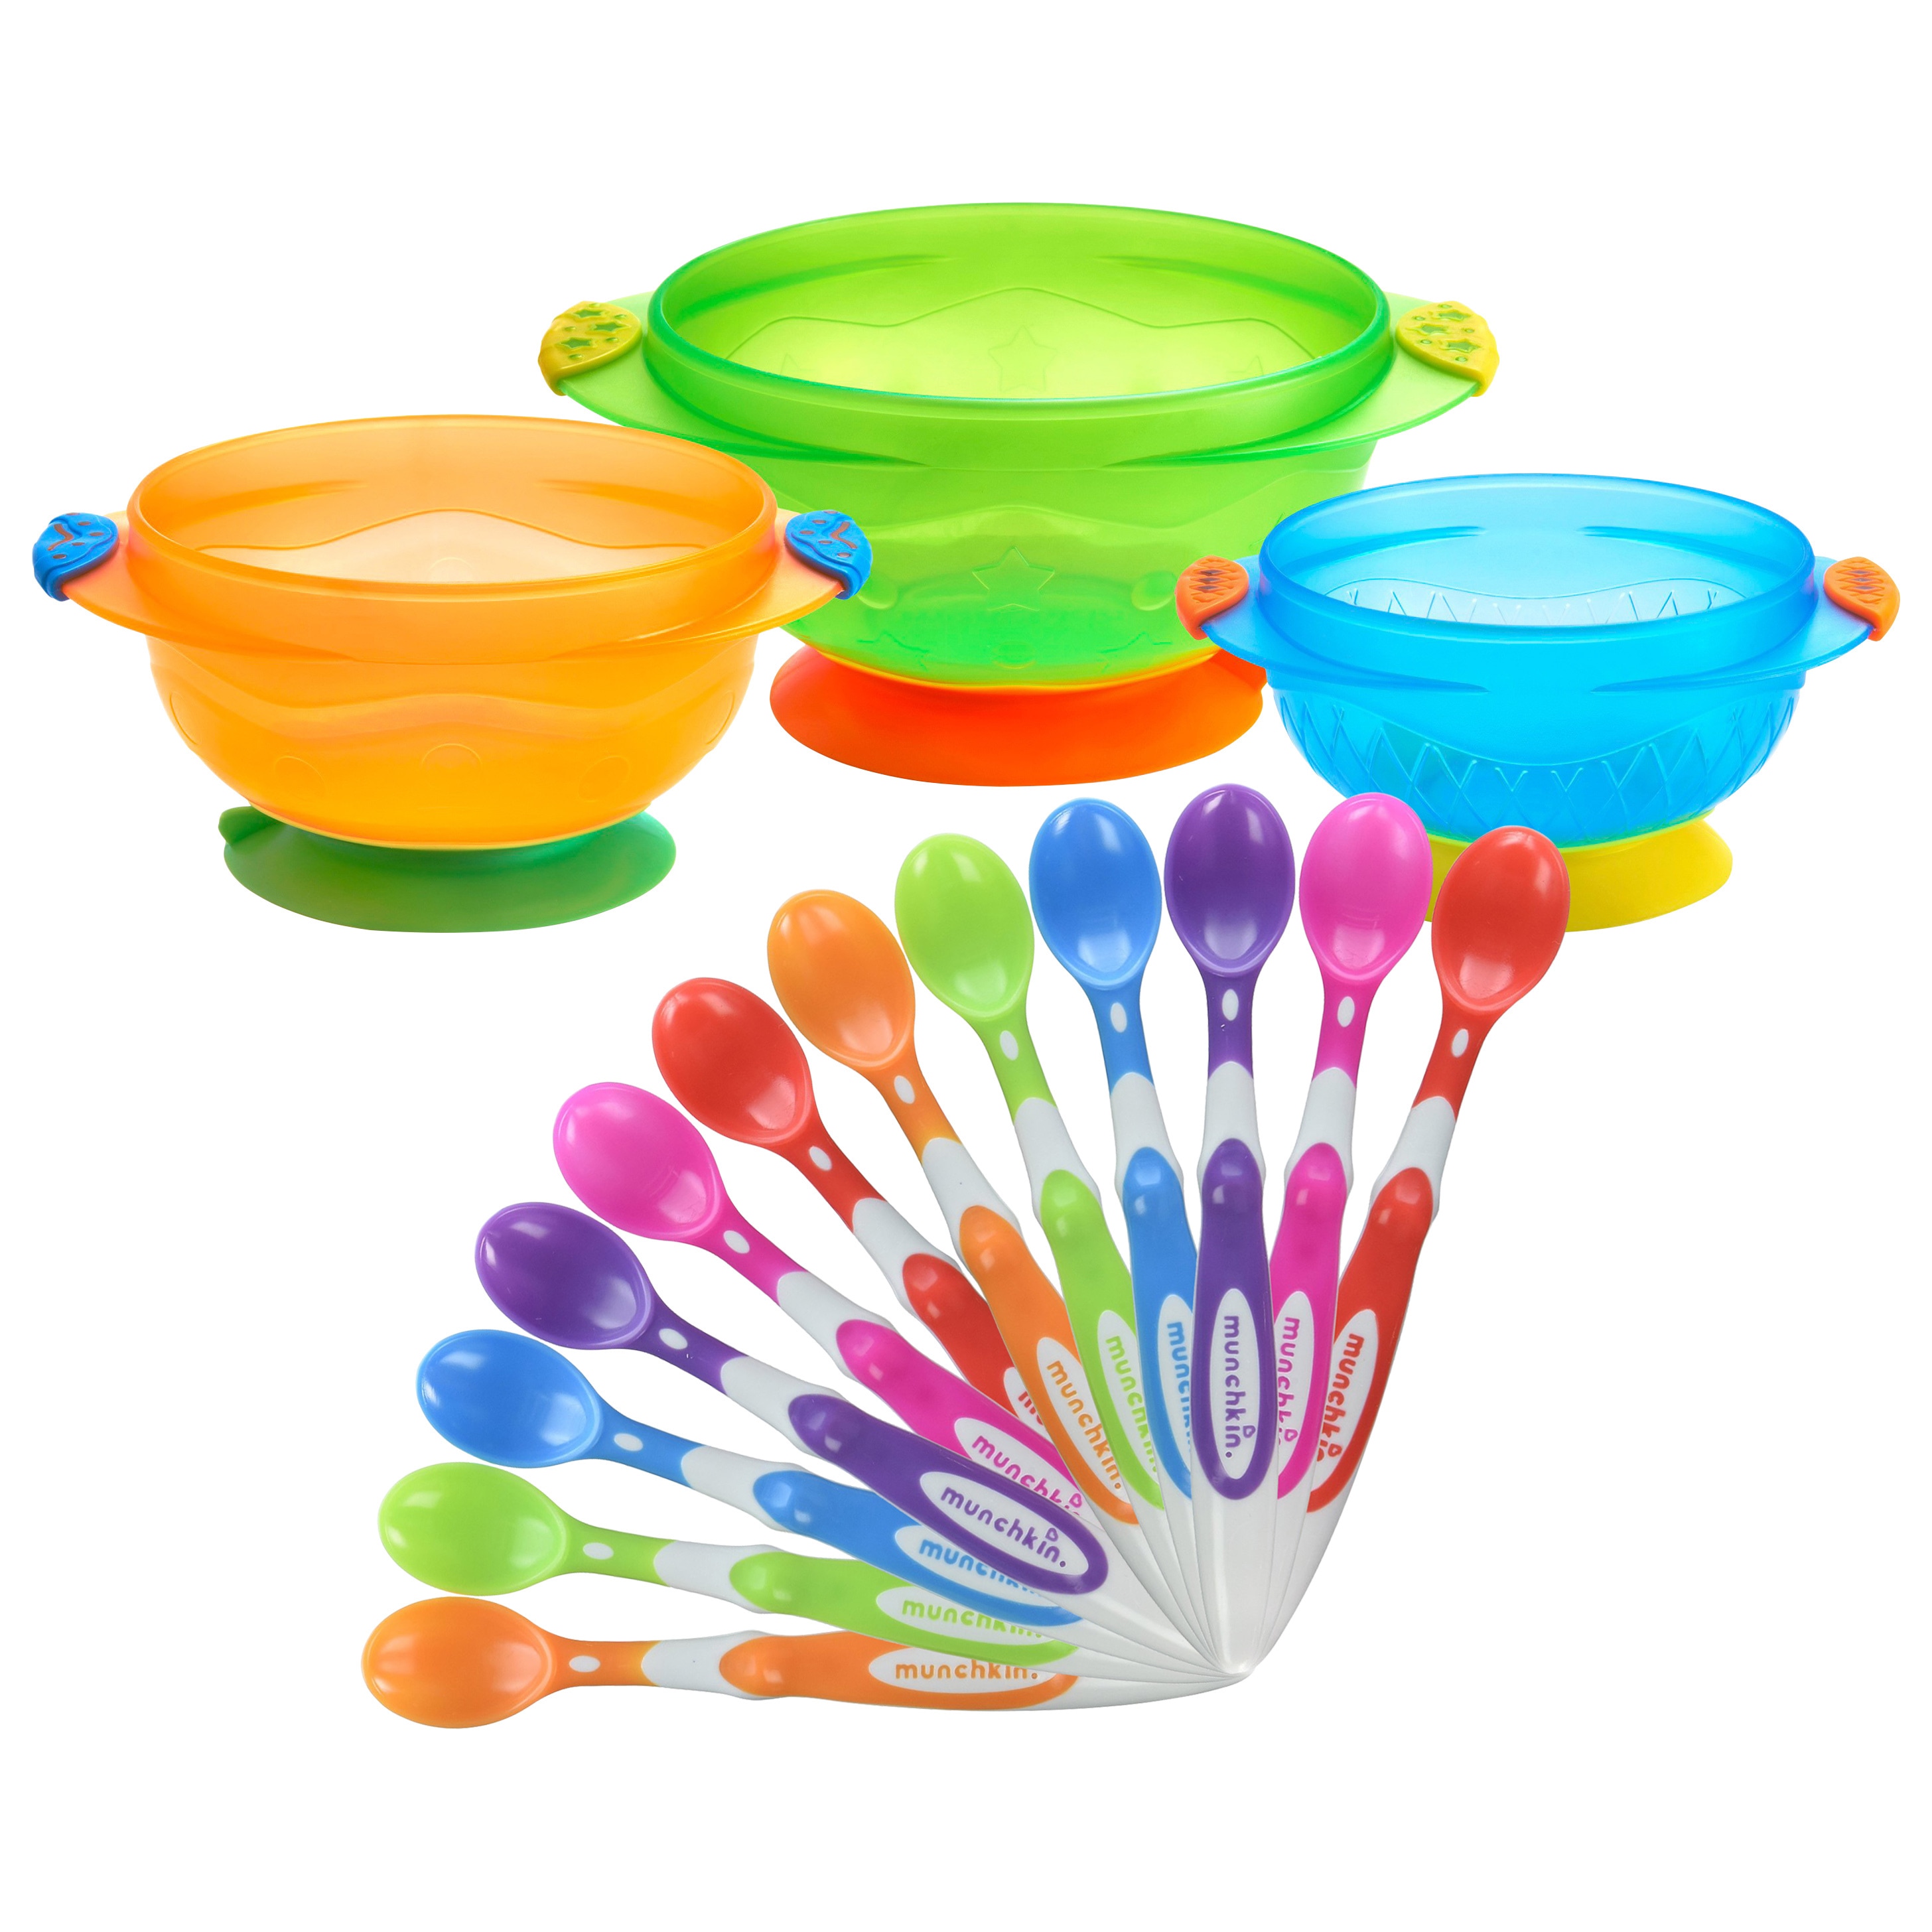 infant spoons and bowls